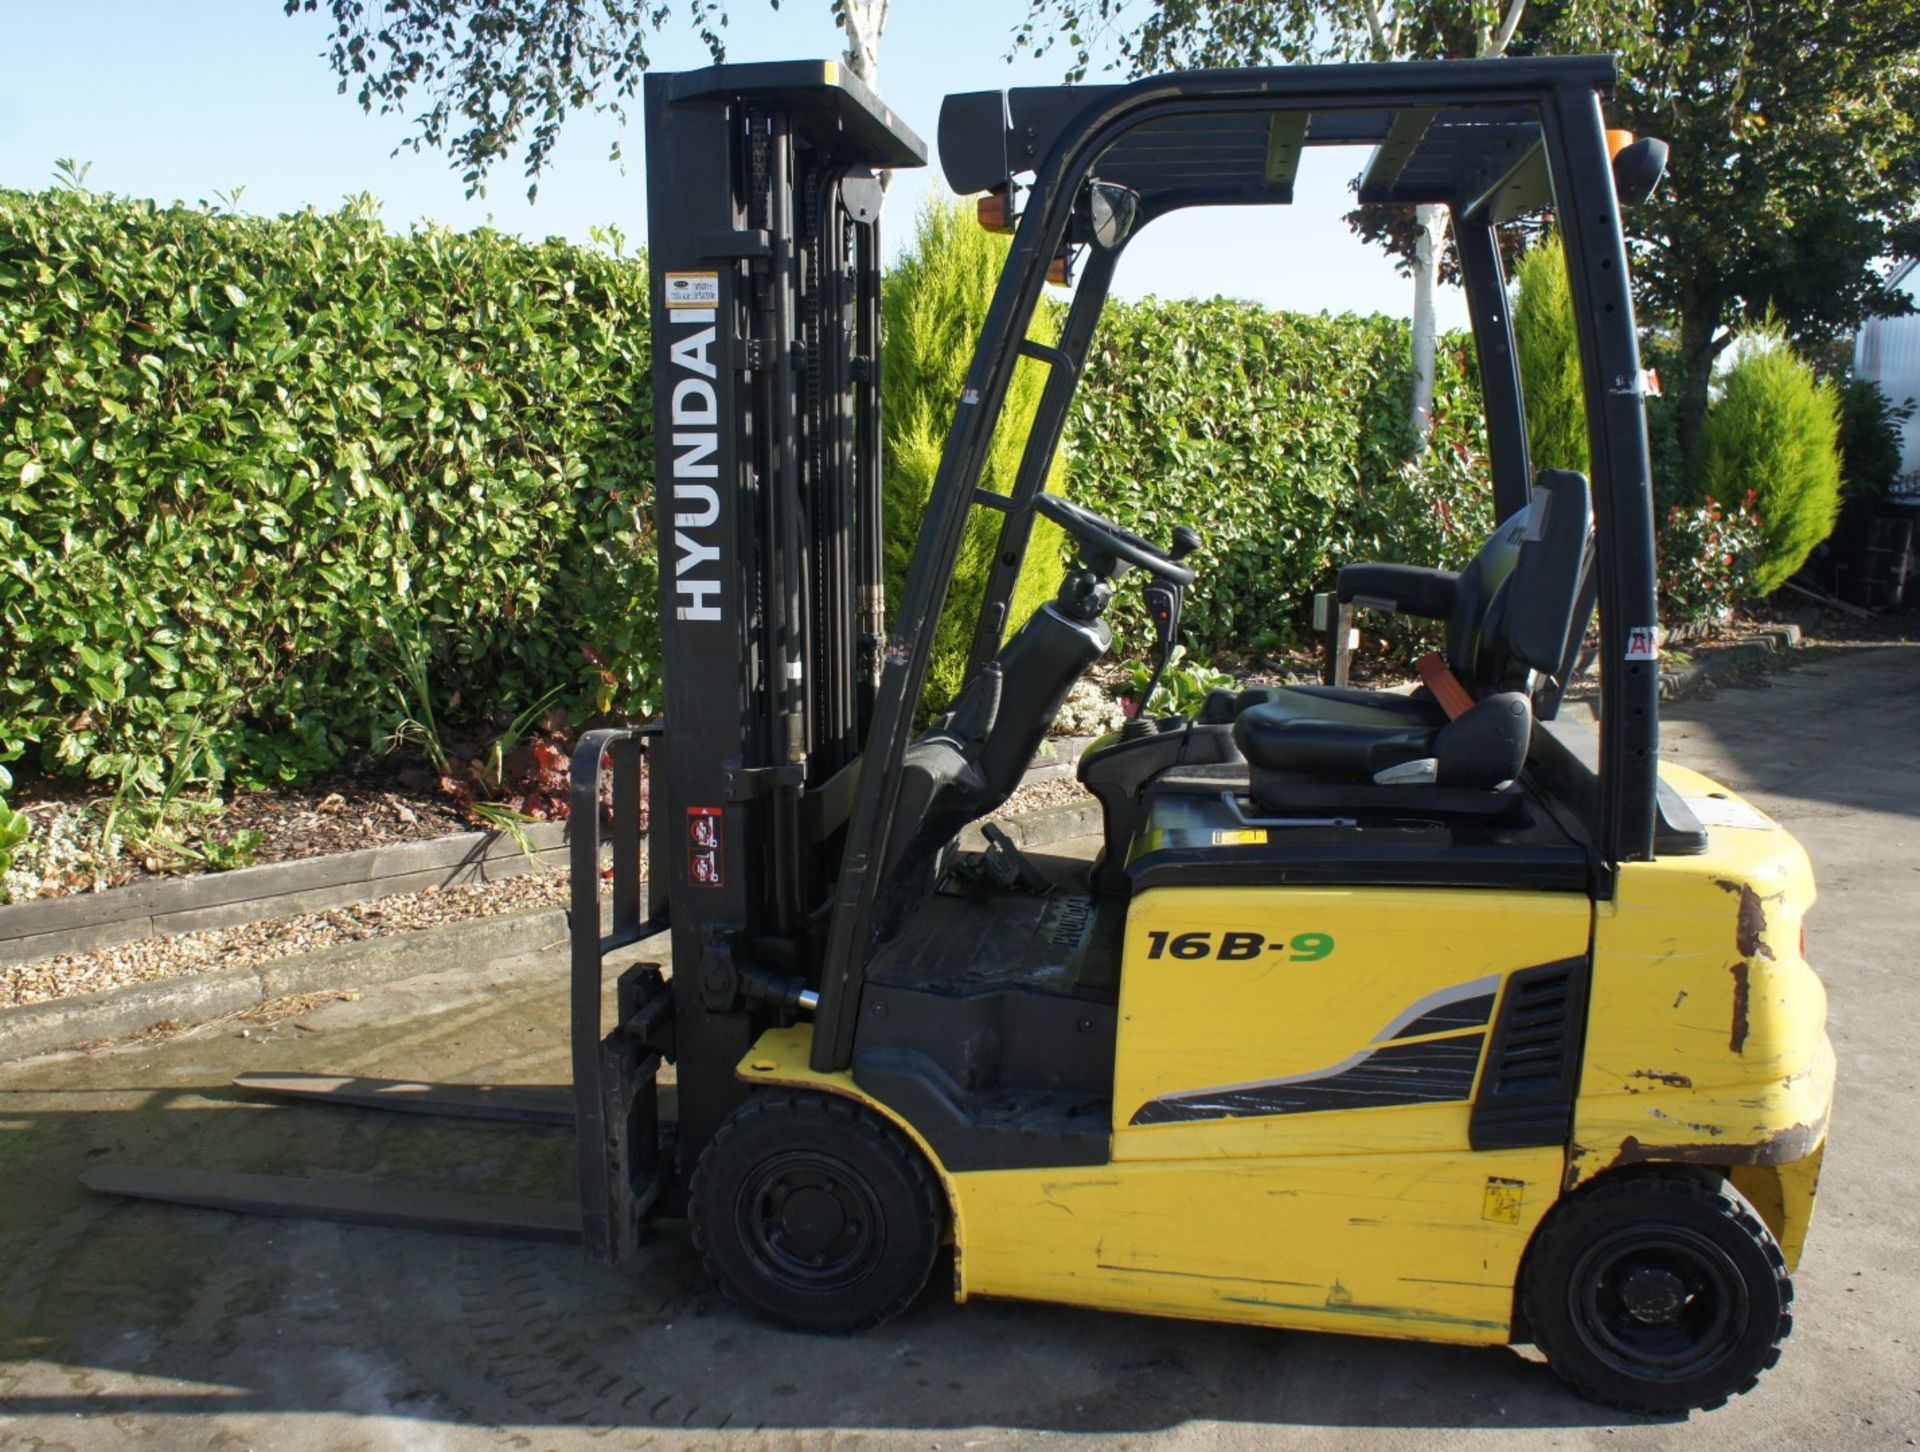 2016 Hyundai 16B-9 Electric Forklift, 1370kg rated capacity, container spec triple mast, 4750mm lift - Image 7 of 18